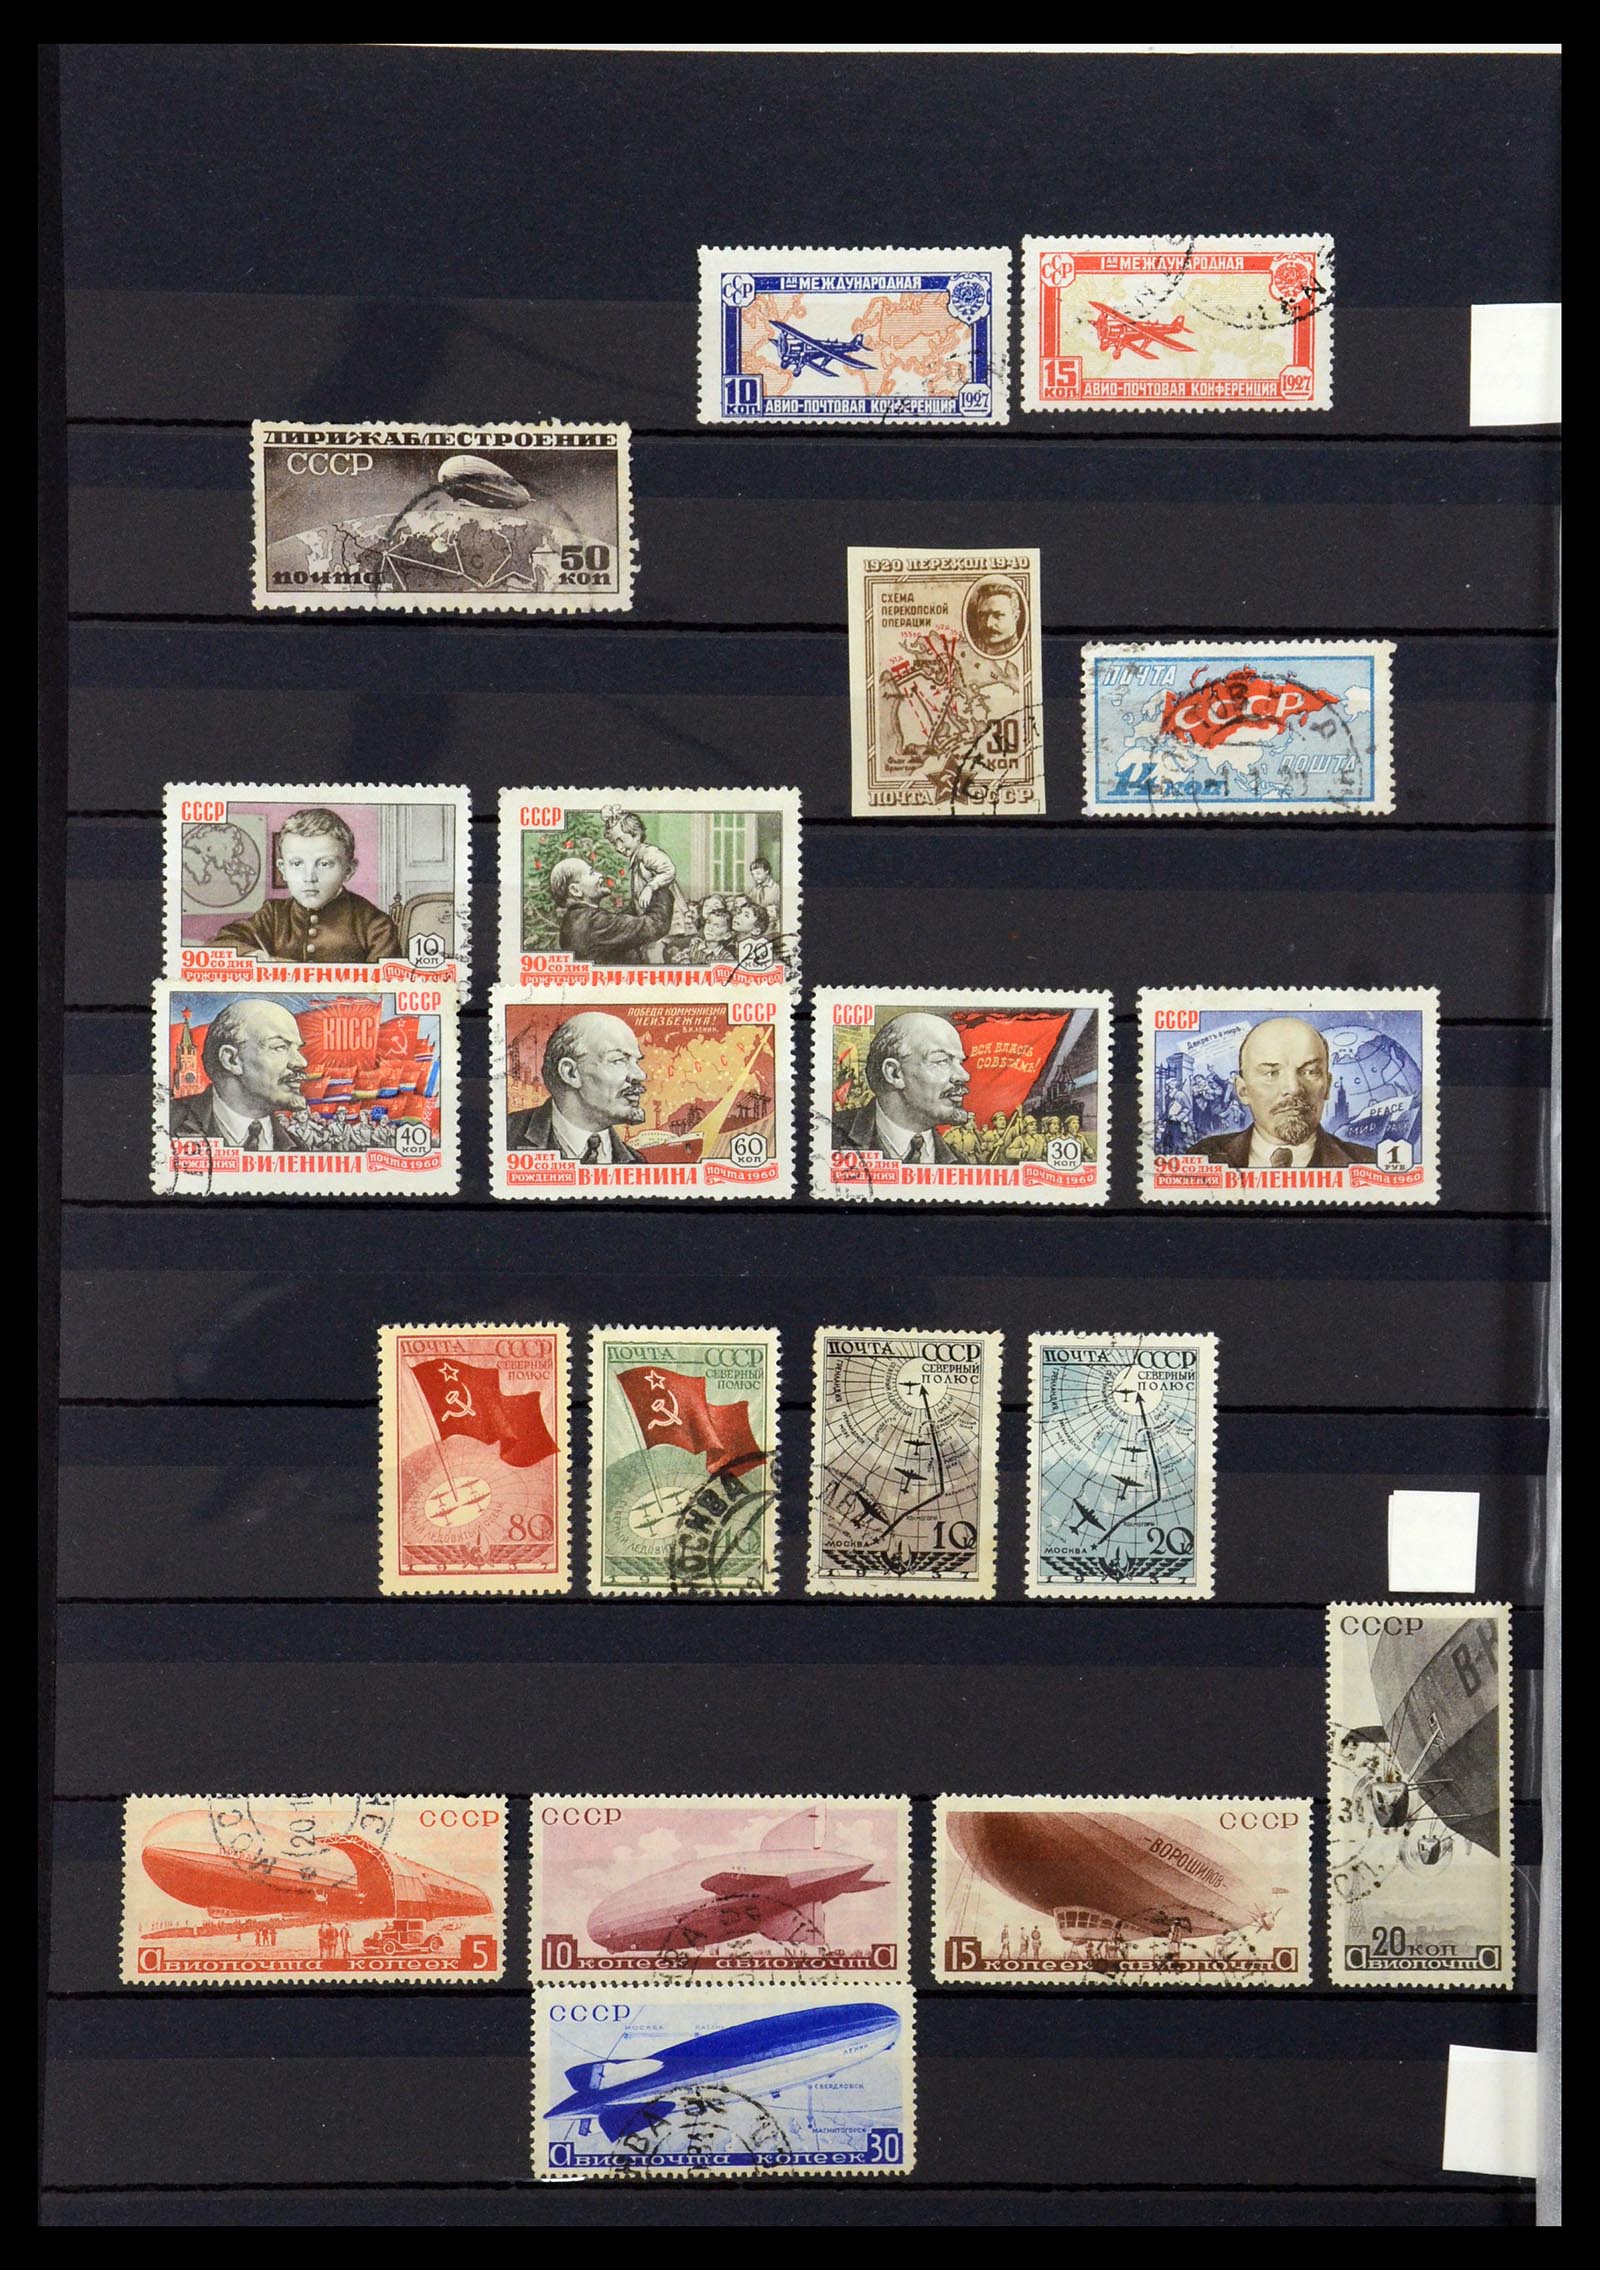 36238 080 - Stamp collection 36238 Motif maps 1900-2000.